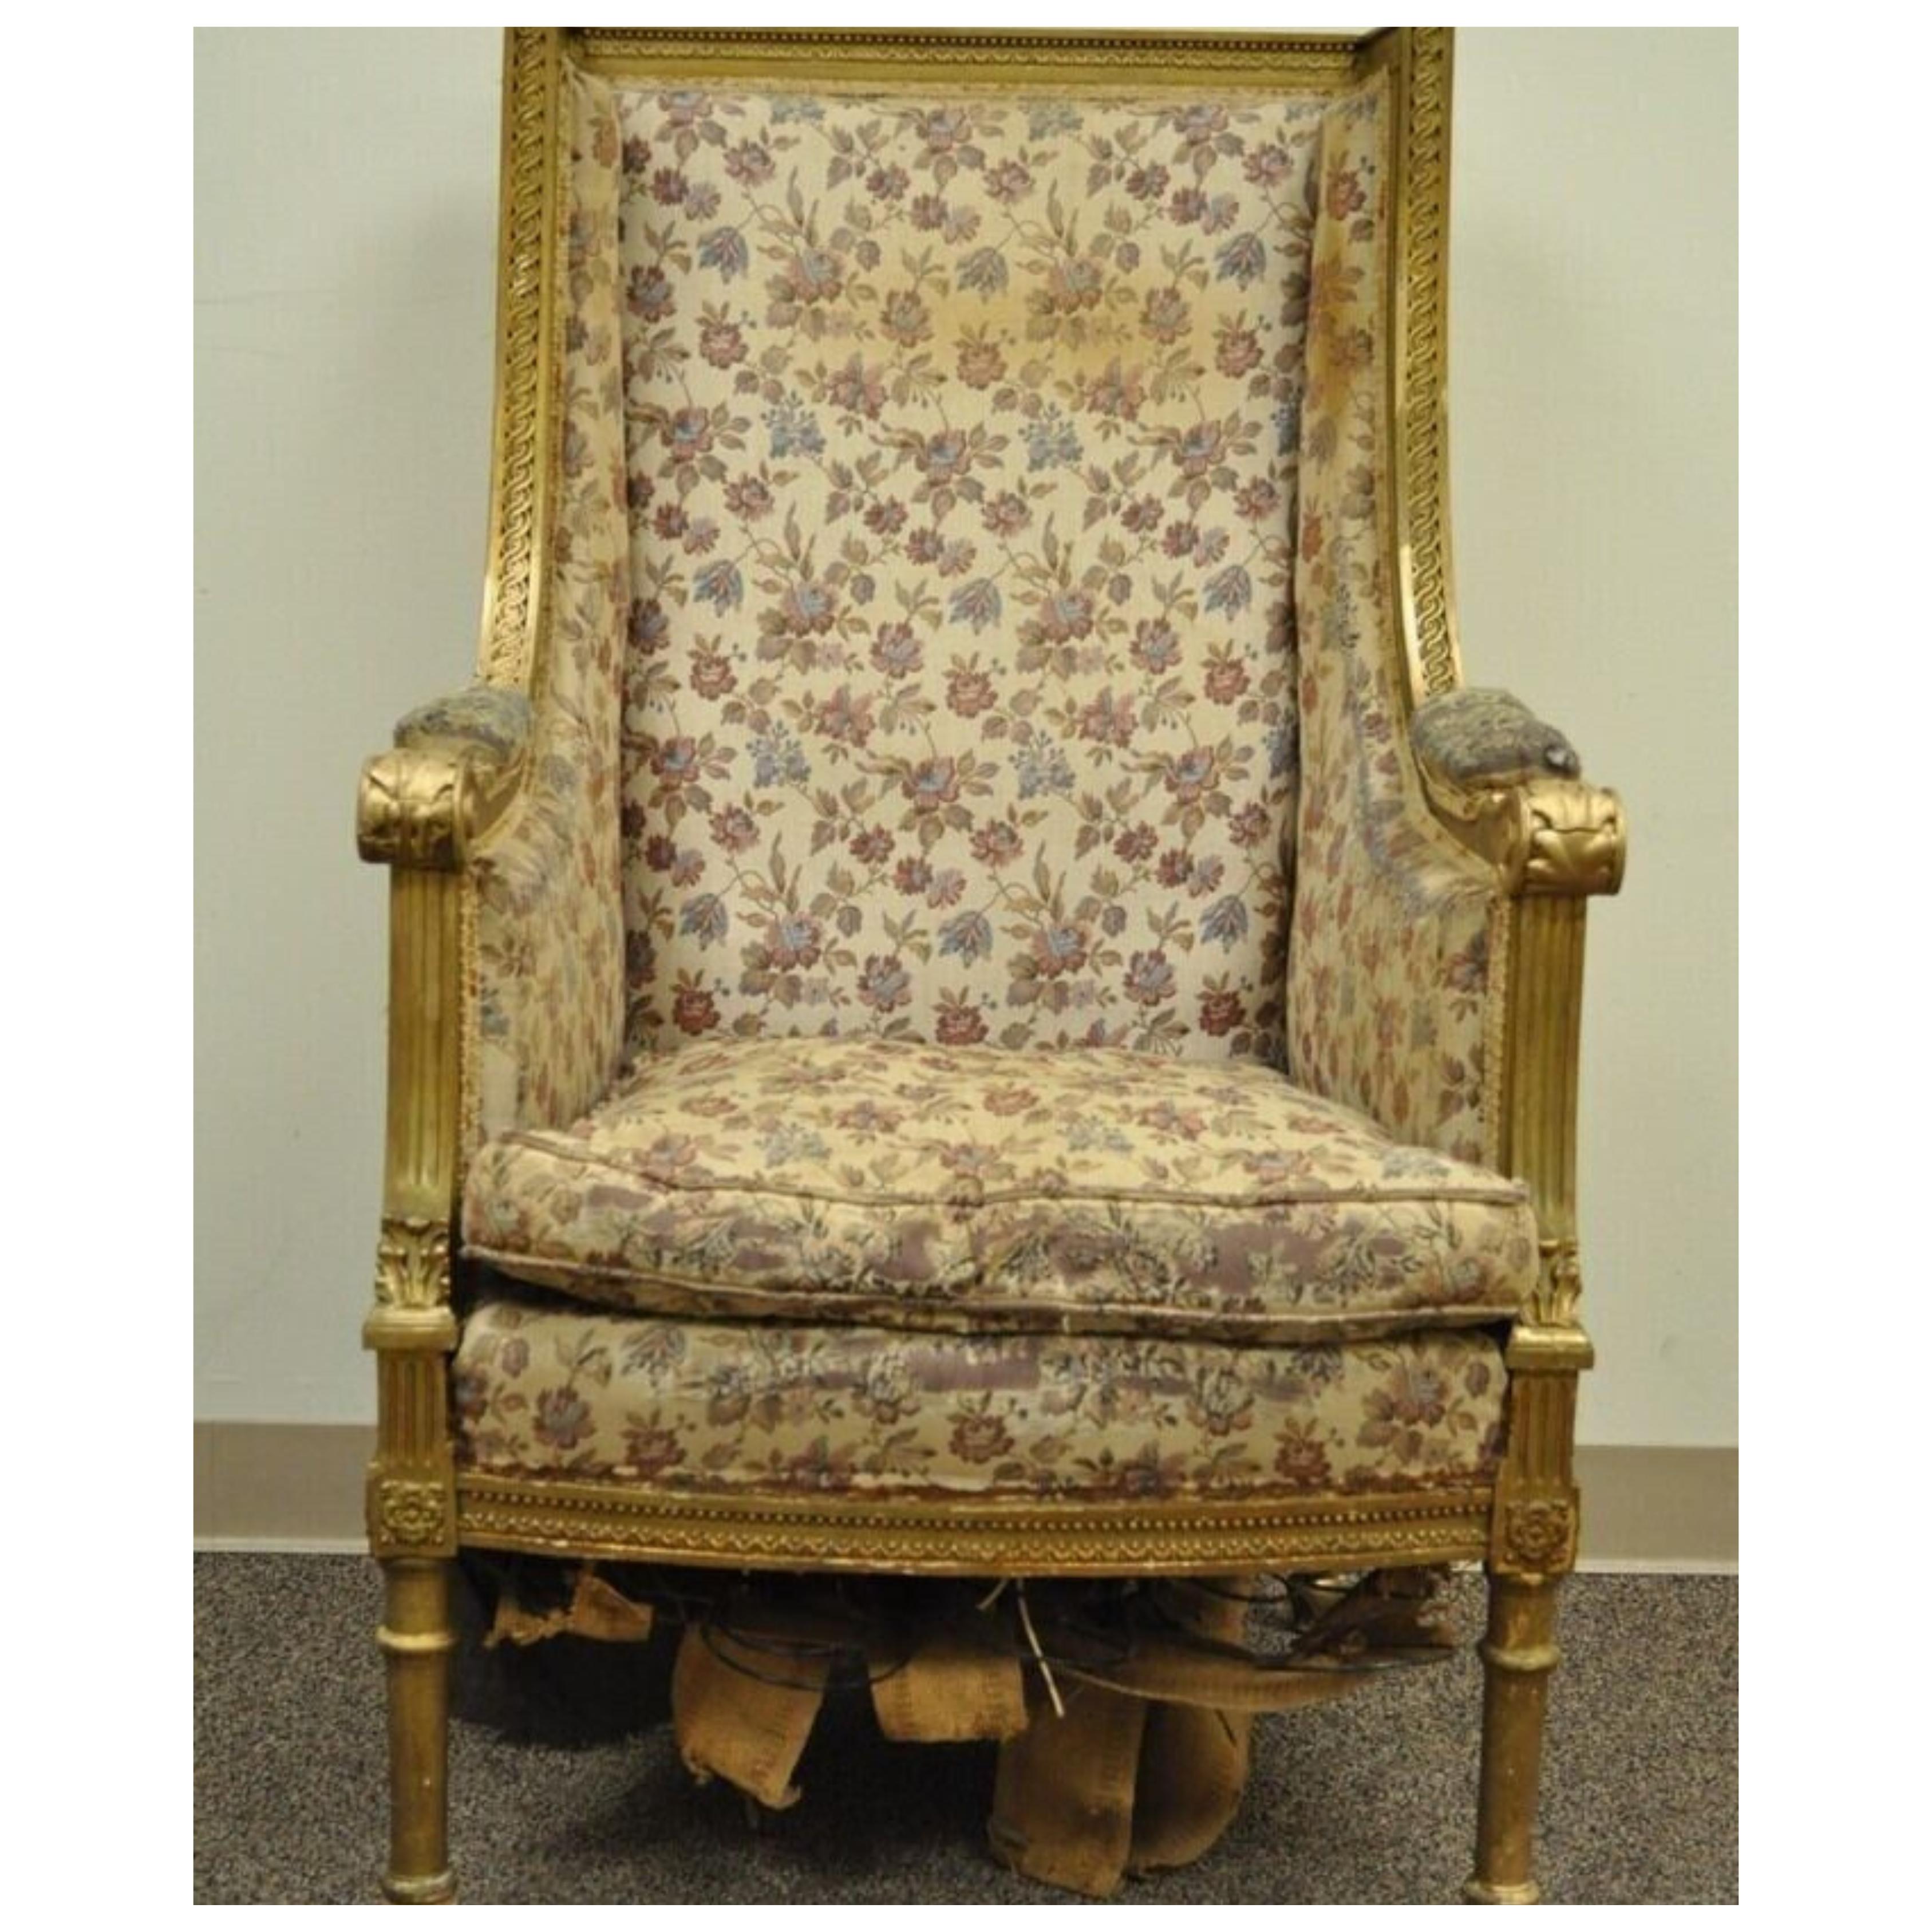 Antique French Louis XVI Style Victorian Gold Gilt Wood Wing Back Bergere Arm Chair. Item featured  has a large impressive profile, carved and applied acanthus and geometric accents, original distressed gilt finish. To be refurbished/reupholstered.